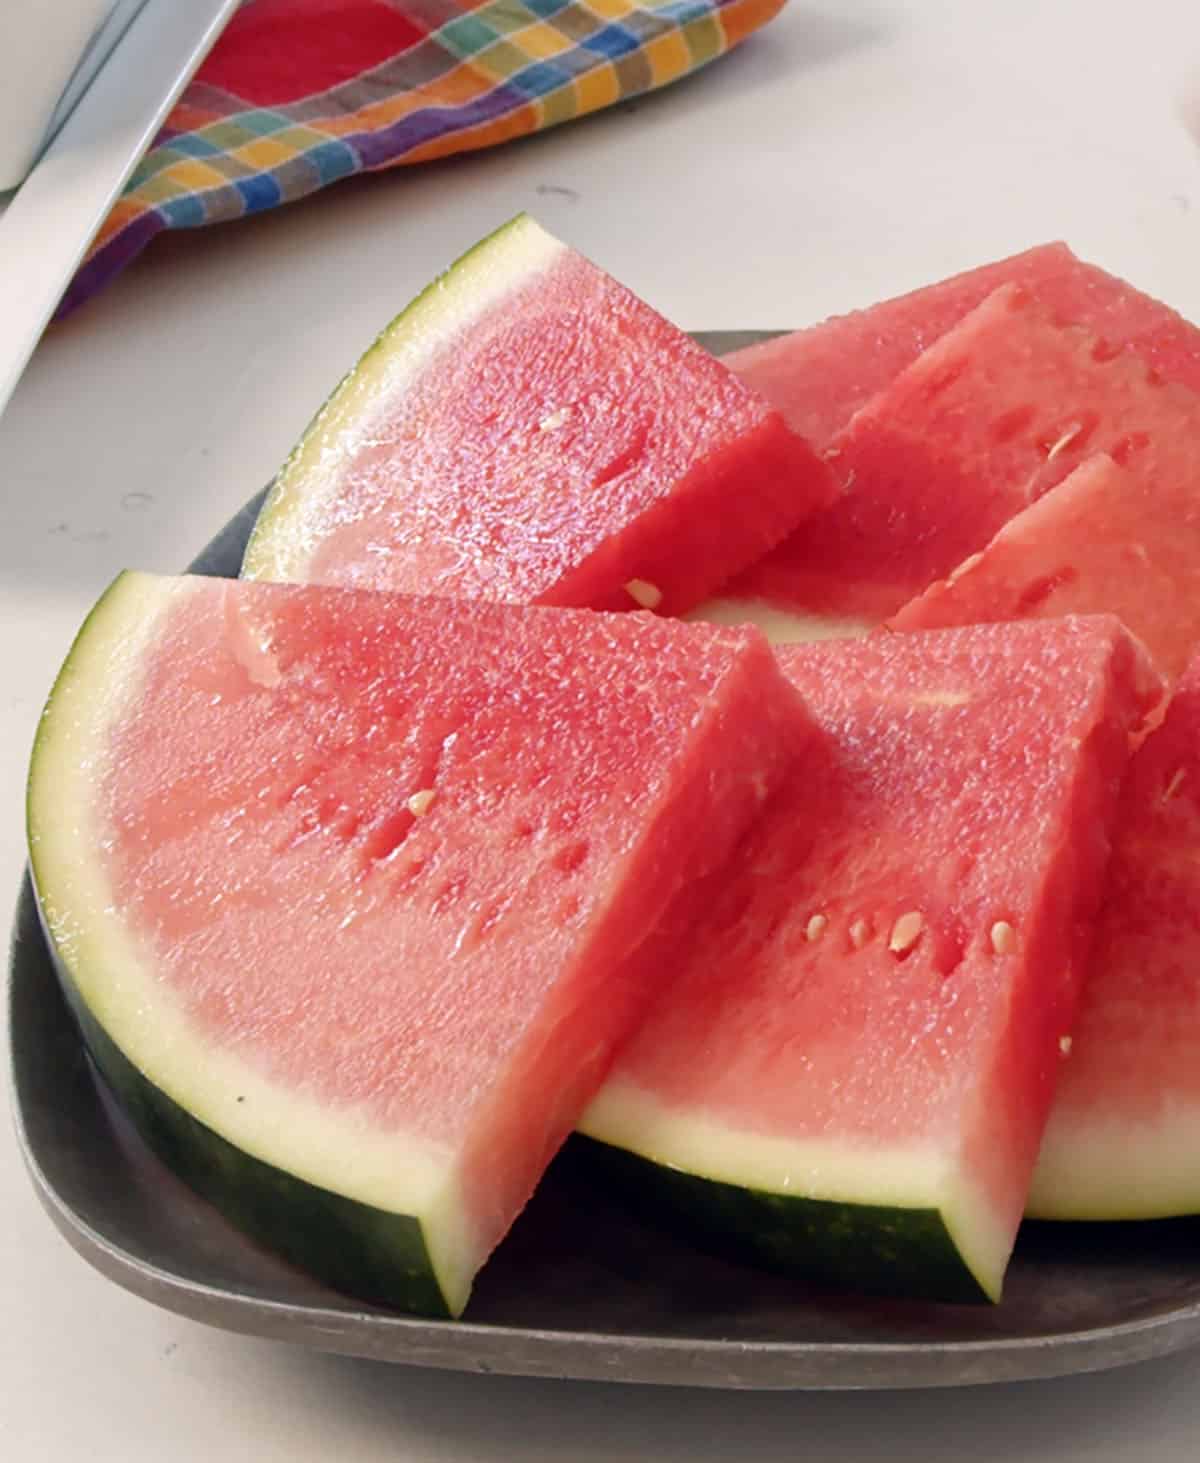 Triangular slices of watermelon are placed on a plate. 